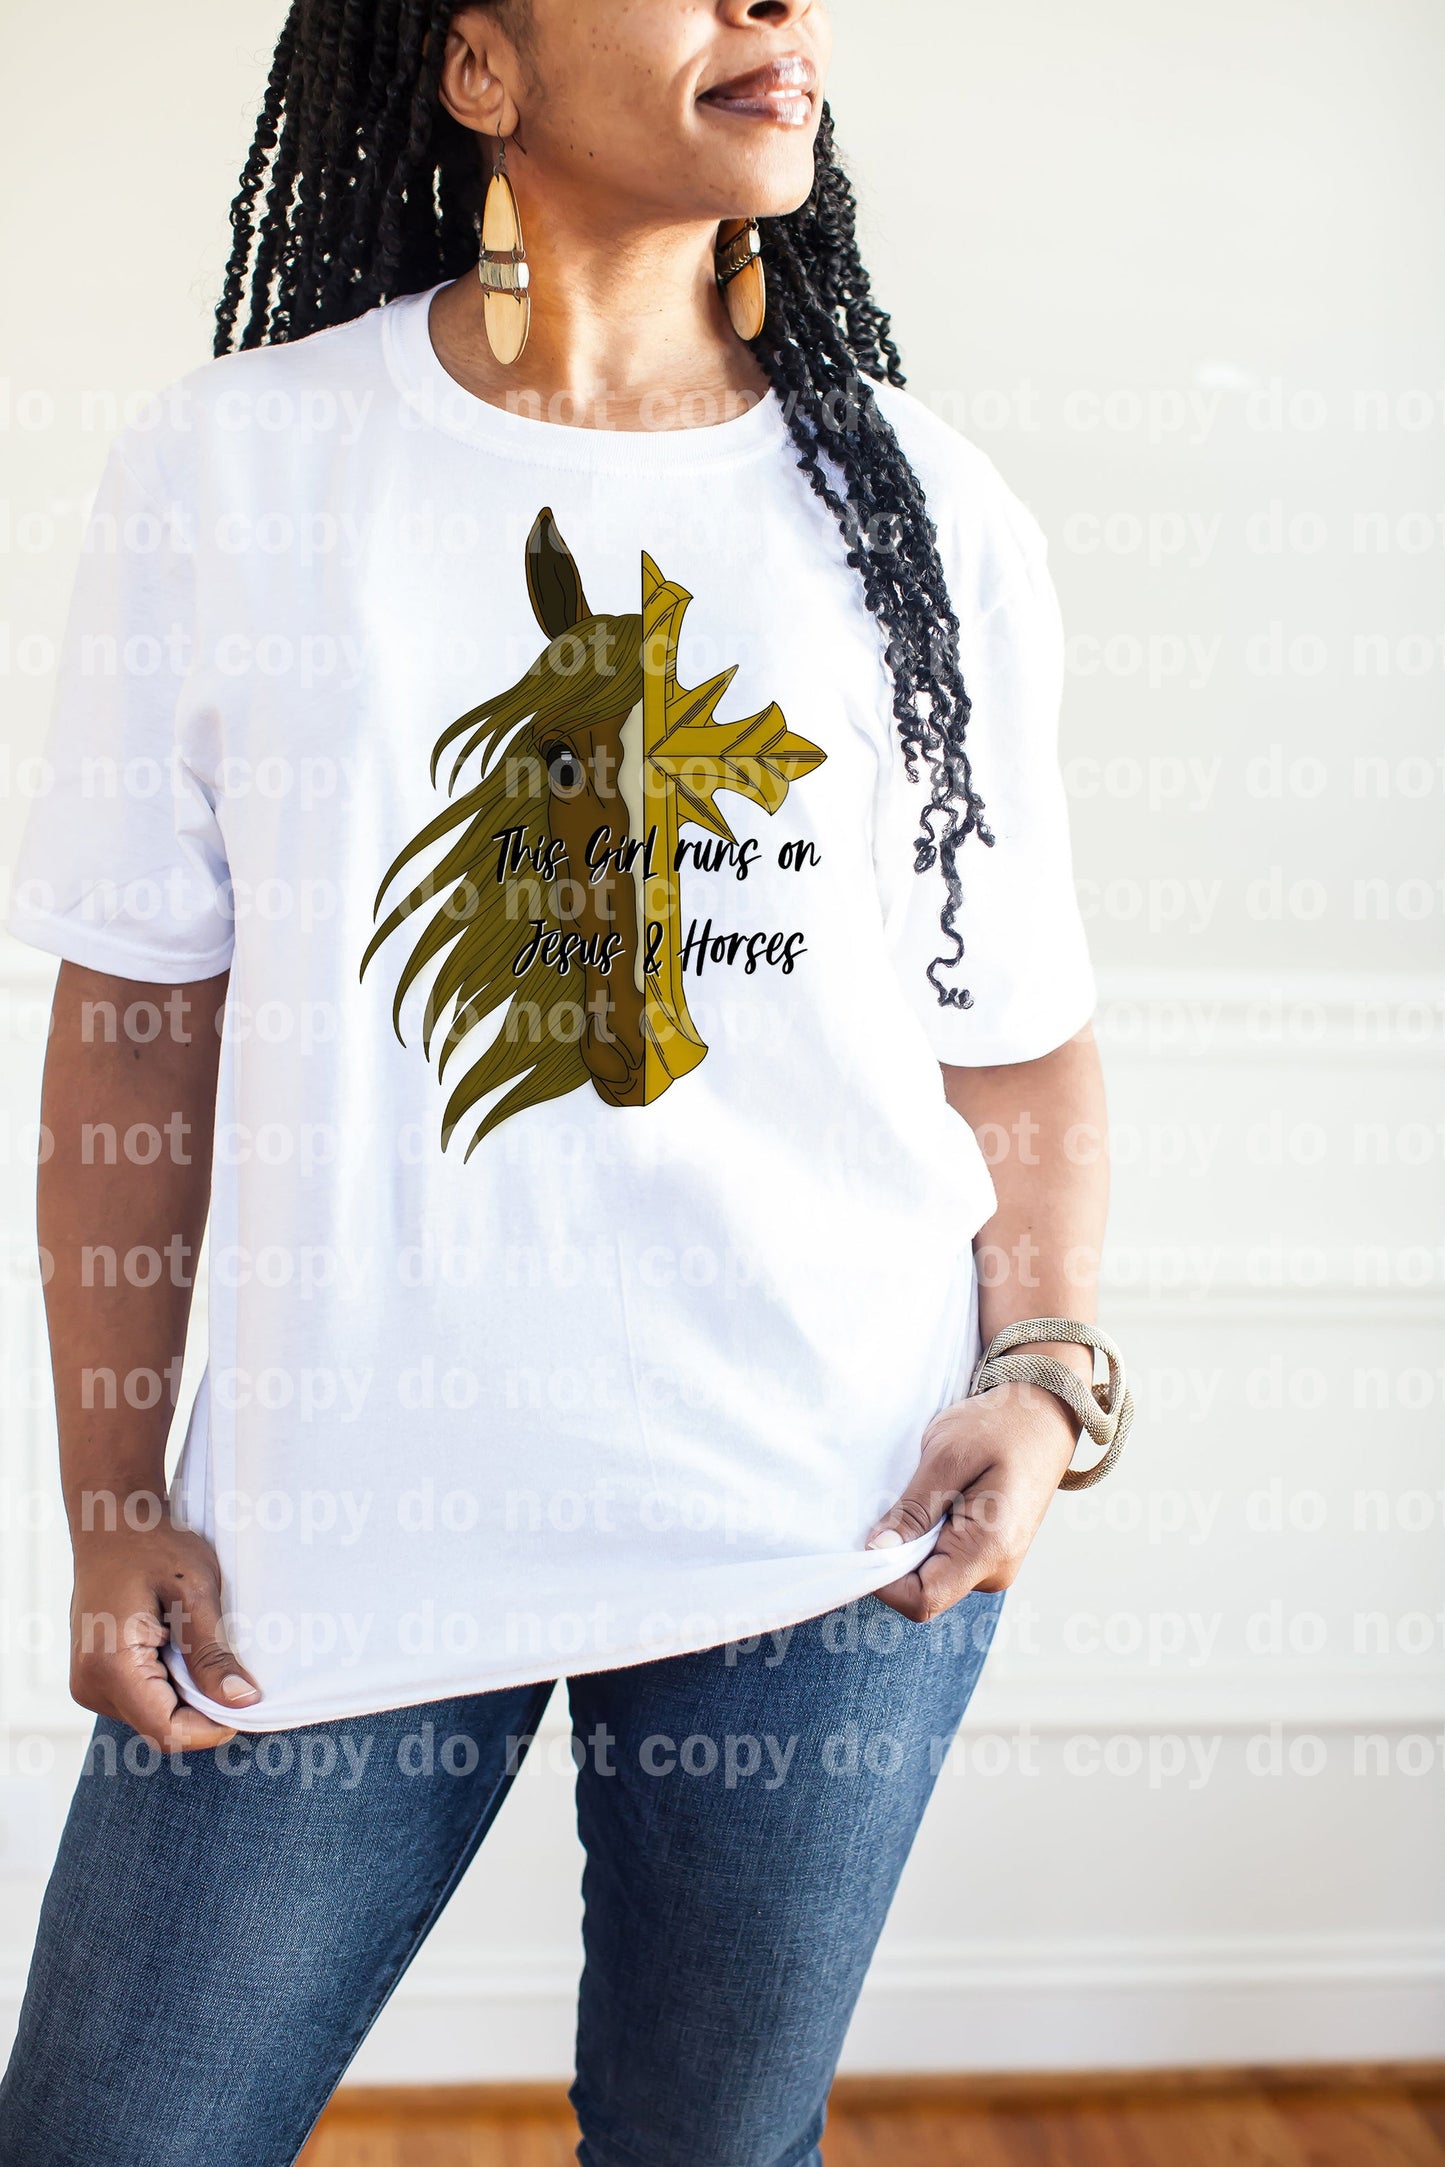 This Girl Runs On Jesus And Horses Dream Print or Sublimation Print